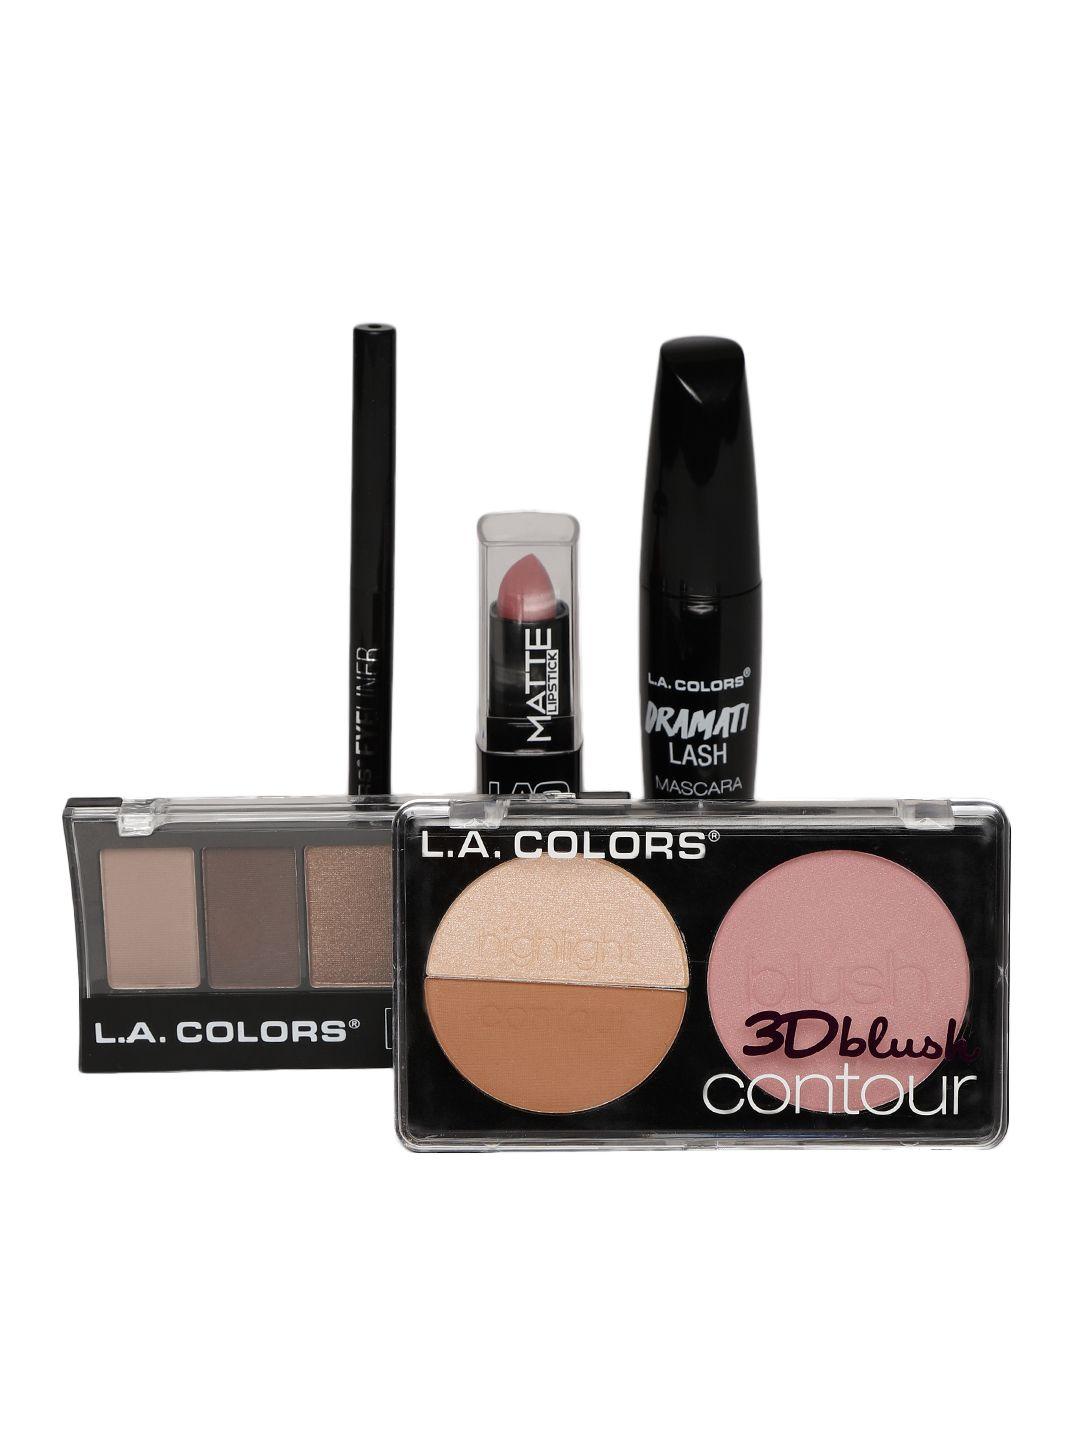 l.a colors insta look girls night out makeup gift set